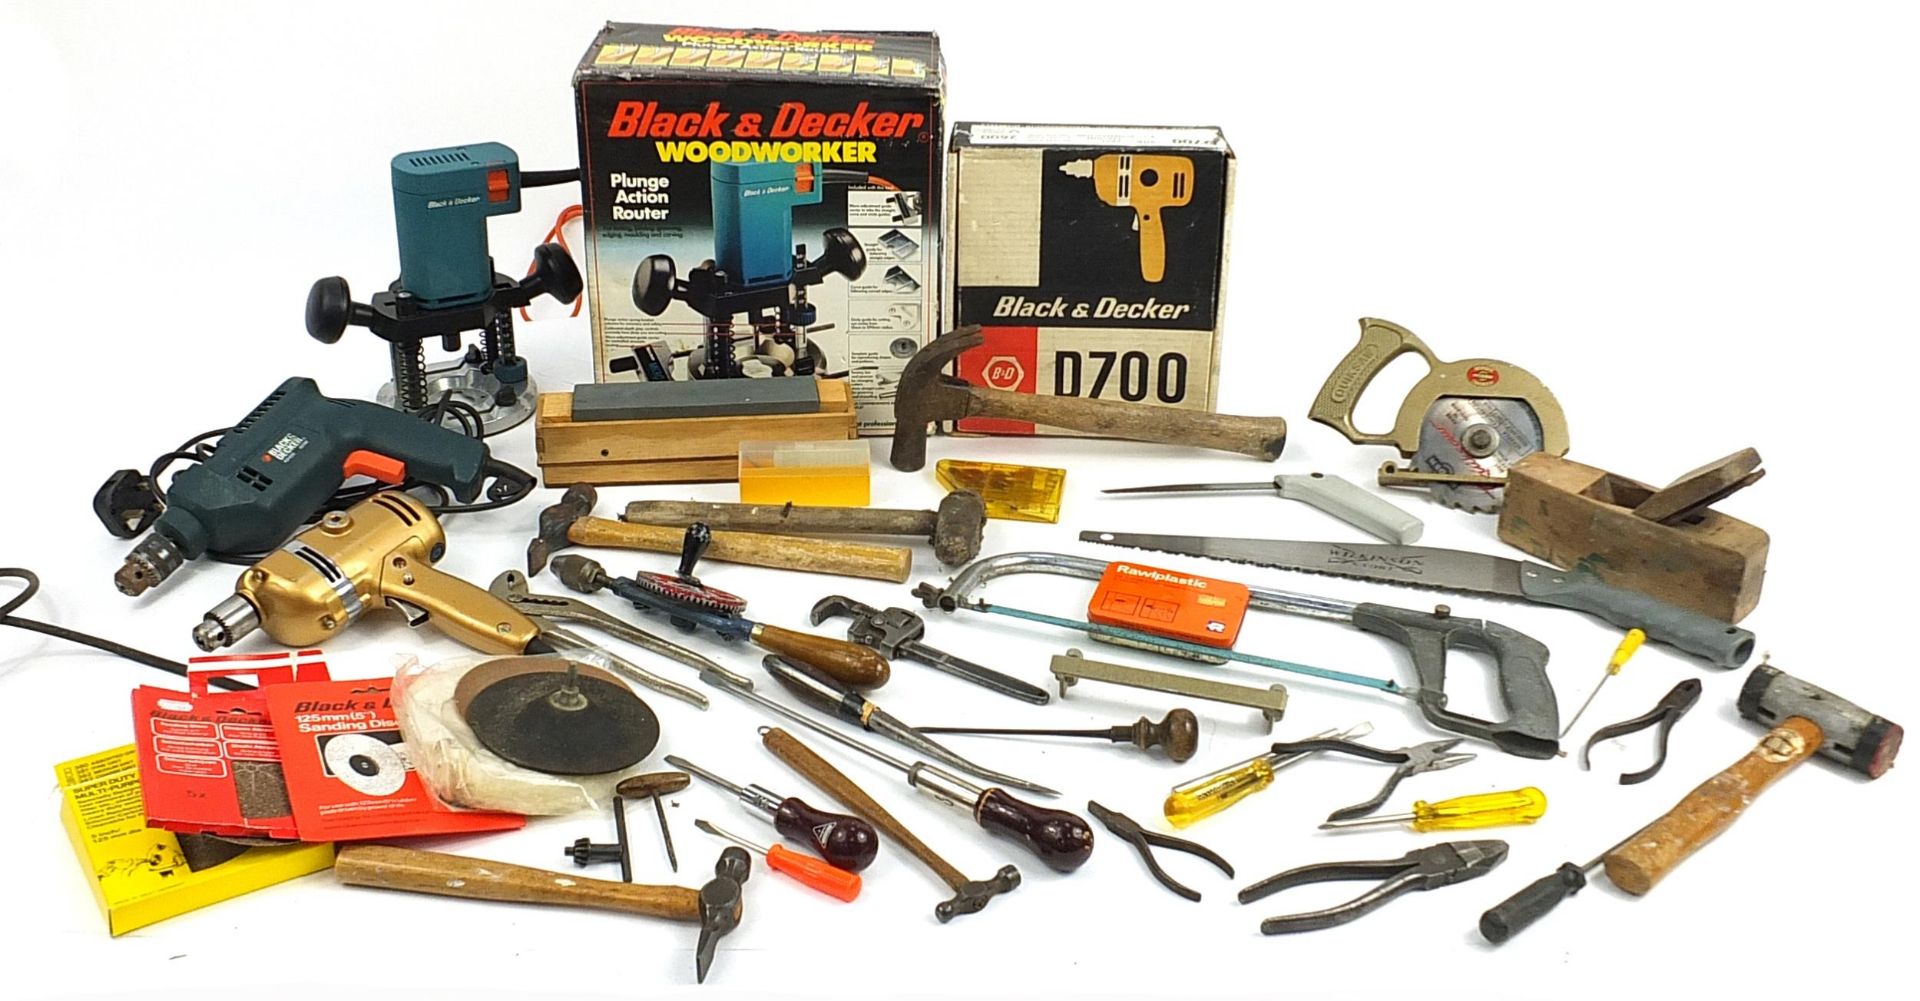 Assorted tools including Black & Decker drills, plunge action router, Wilkinson saw, retro drill